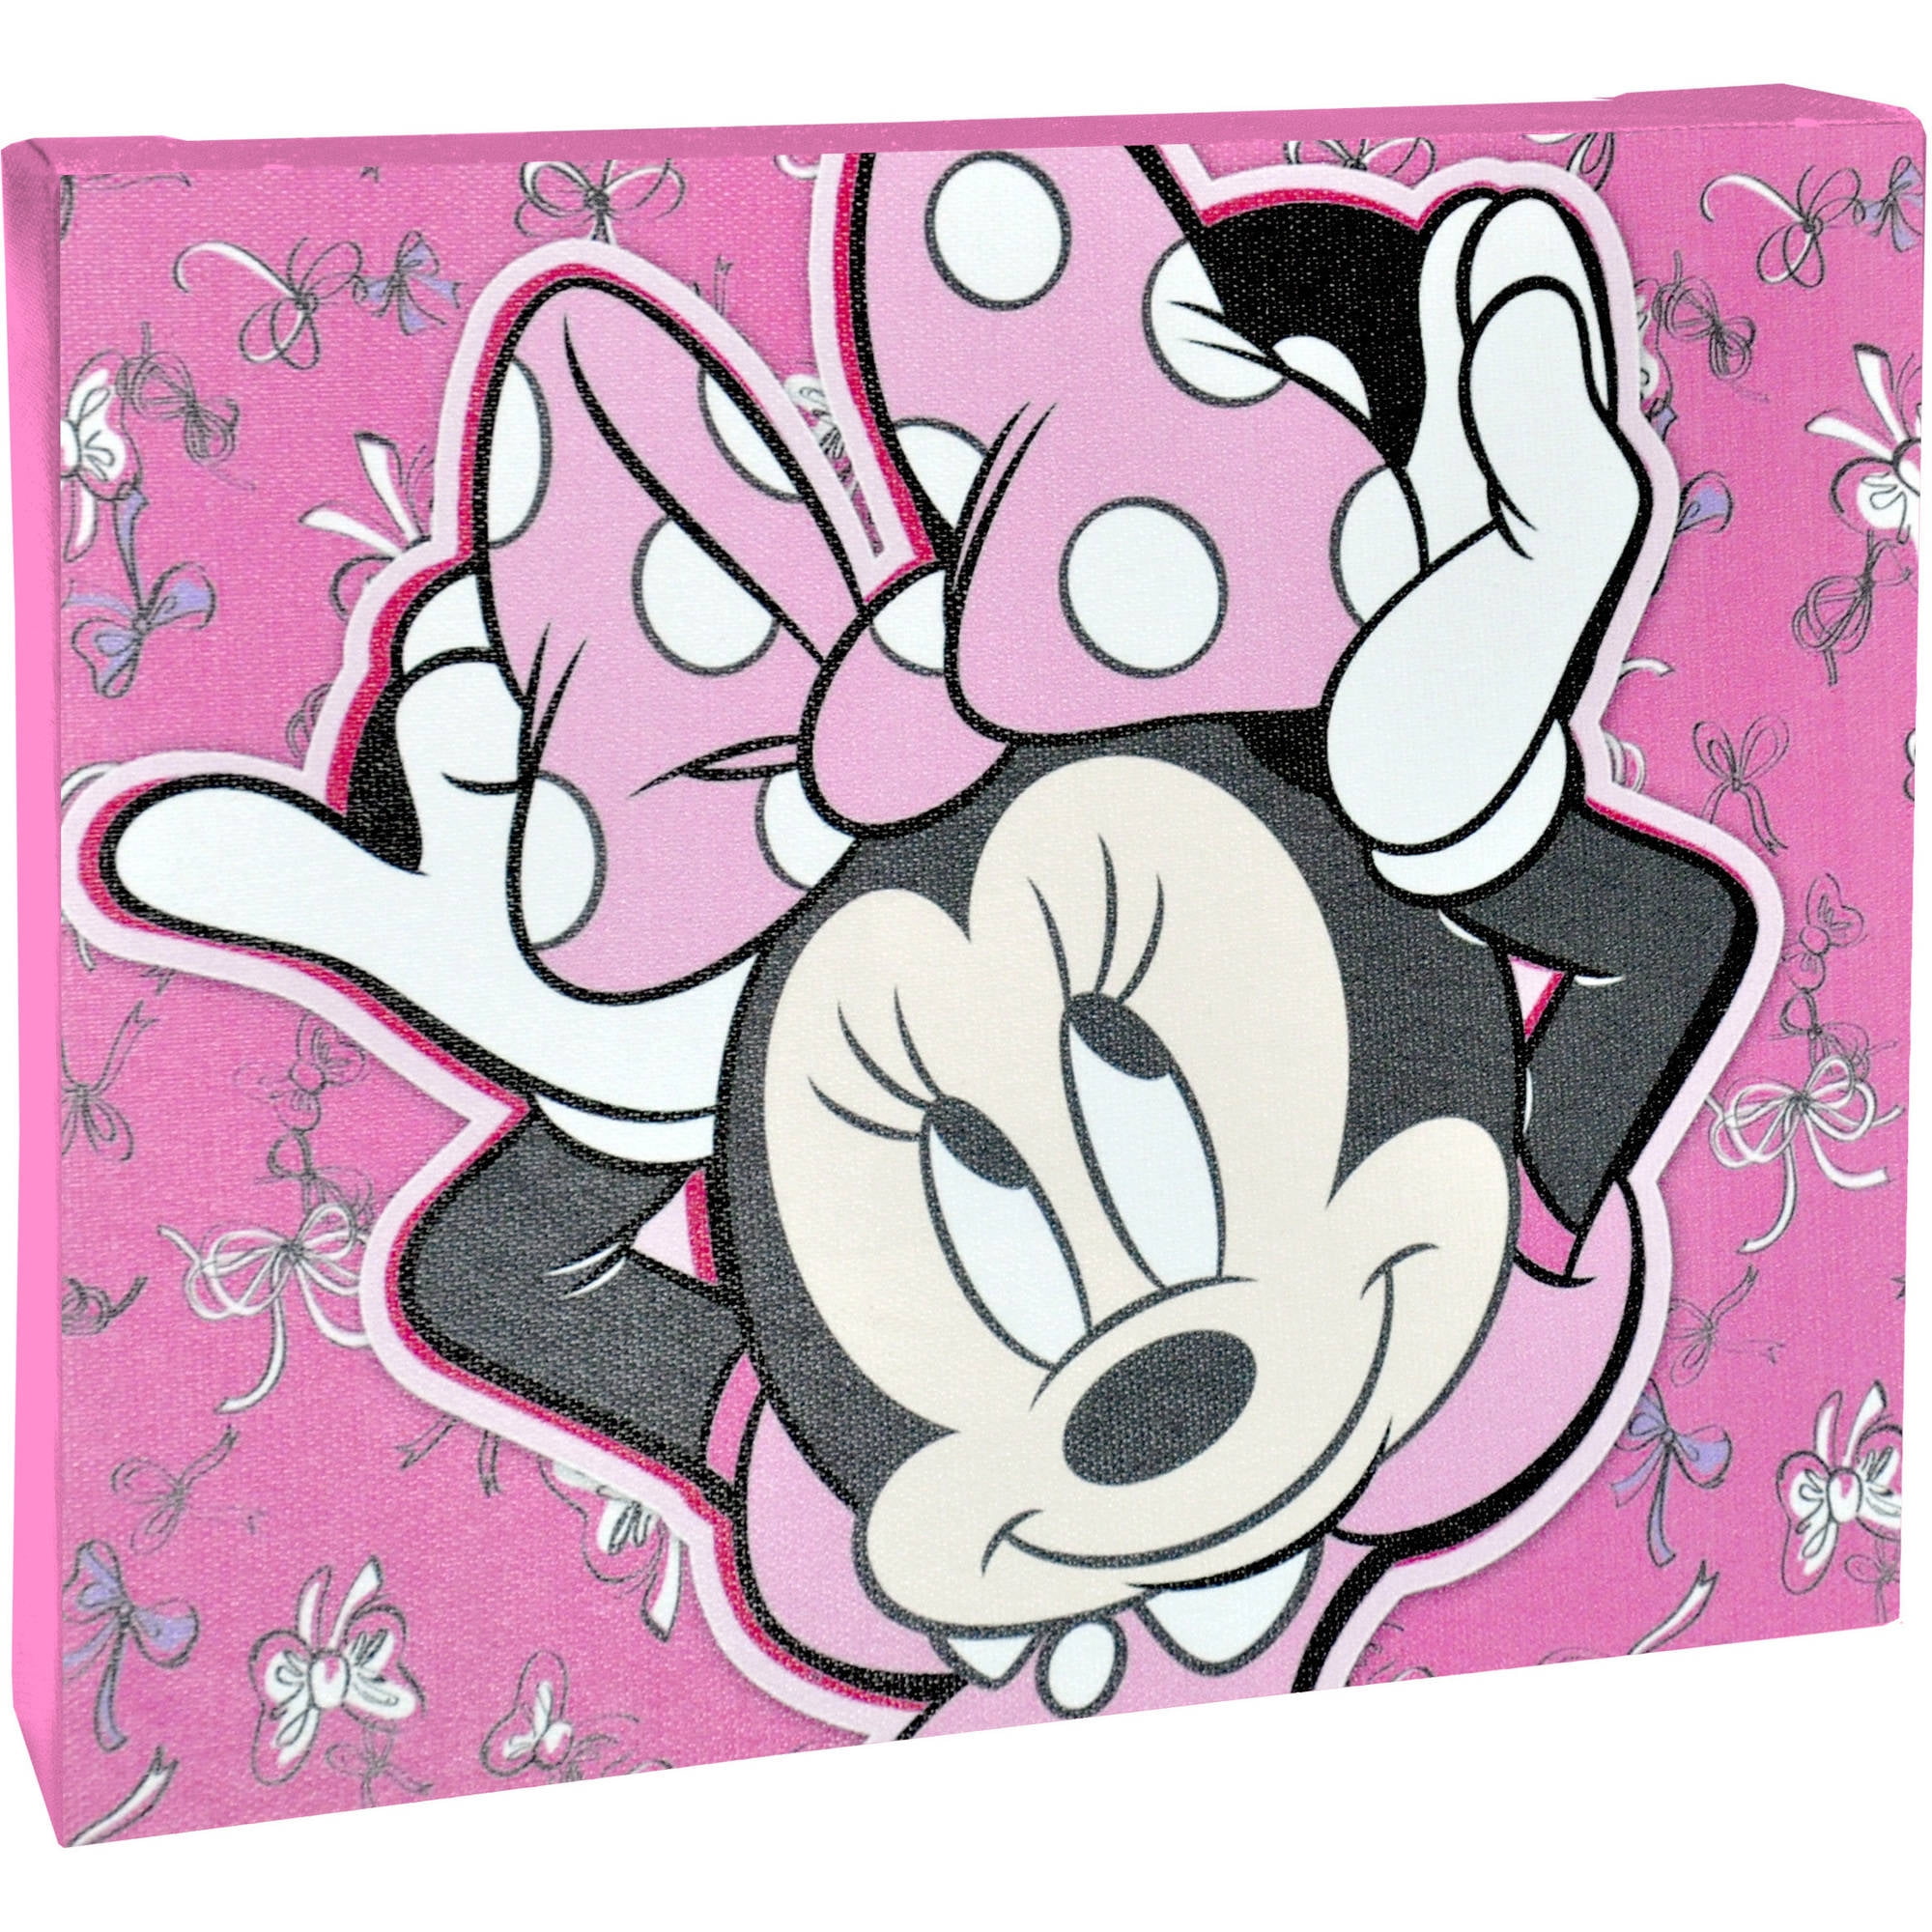 ONLY  £7.99 Design C CANVAS PICTURE 10" x 10" MINNIE MOUSE 